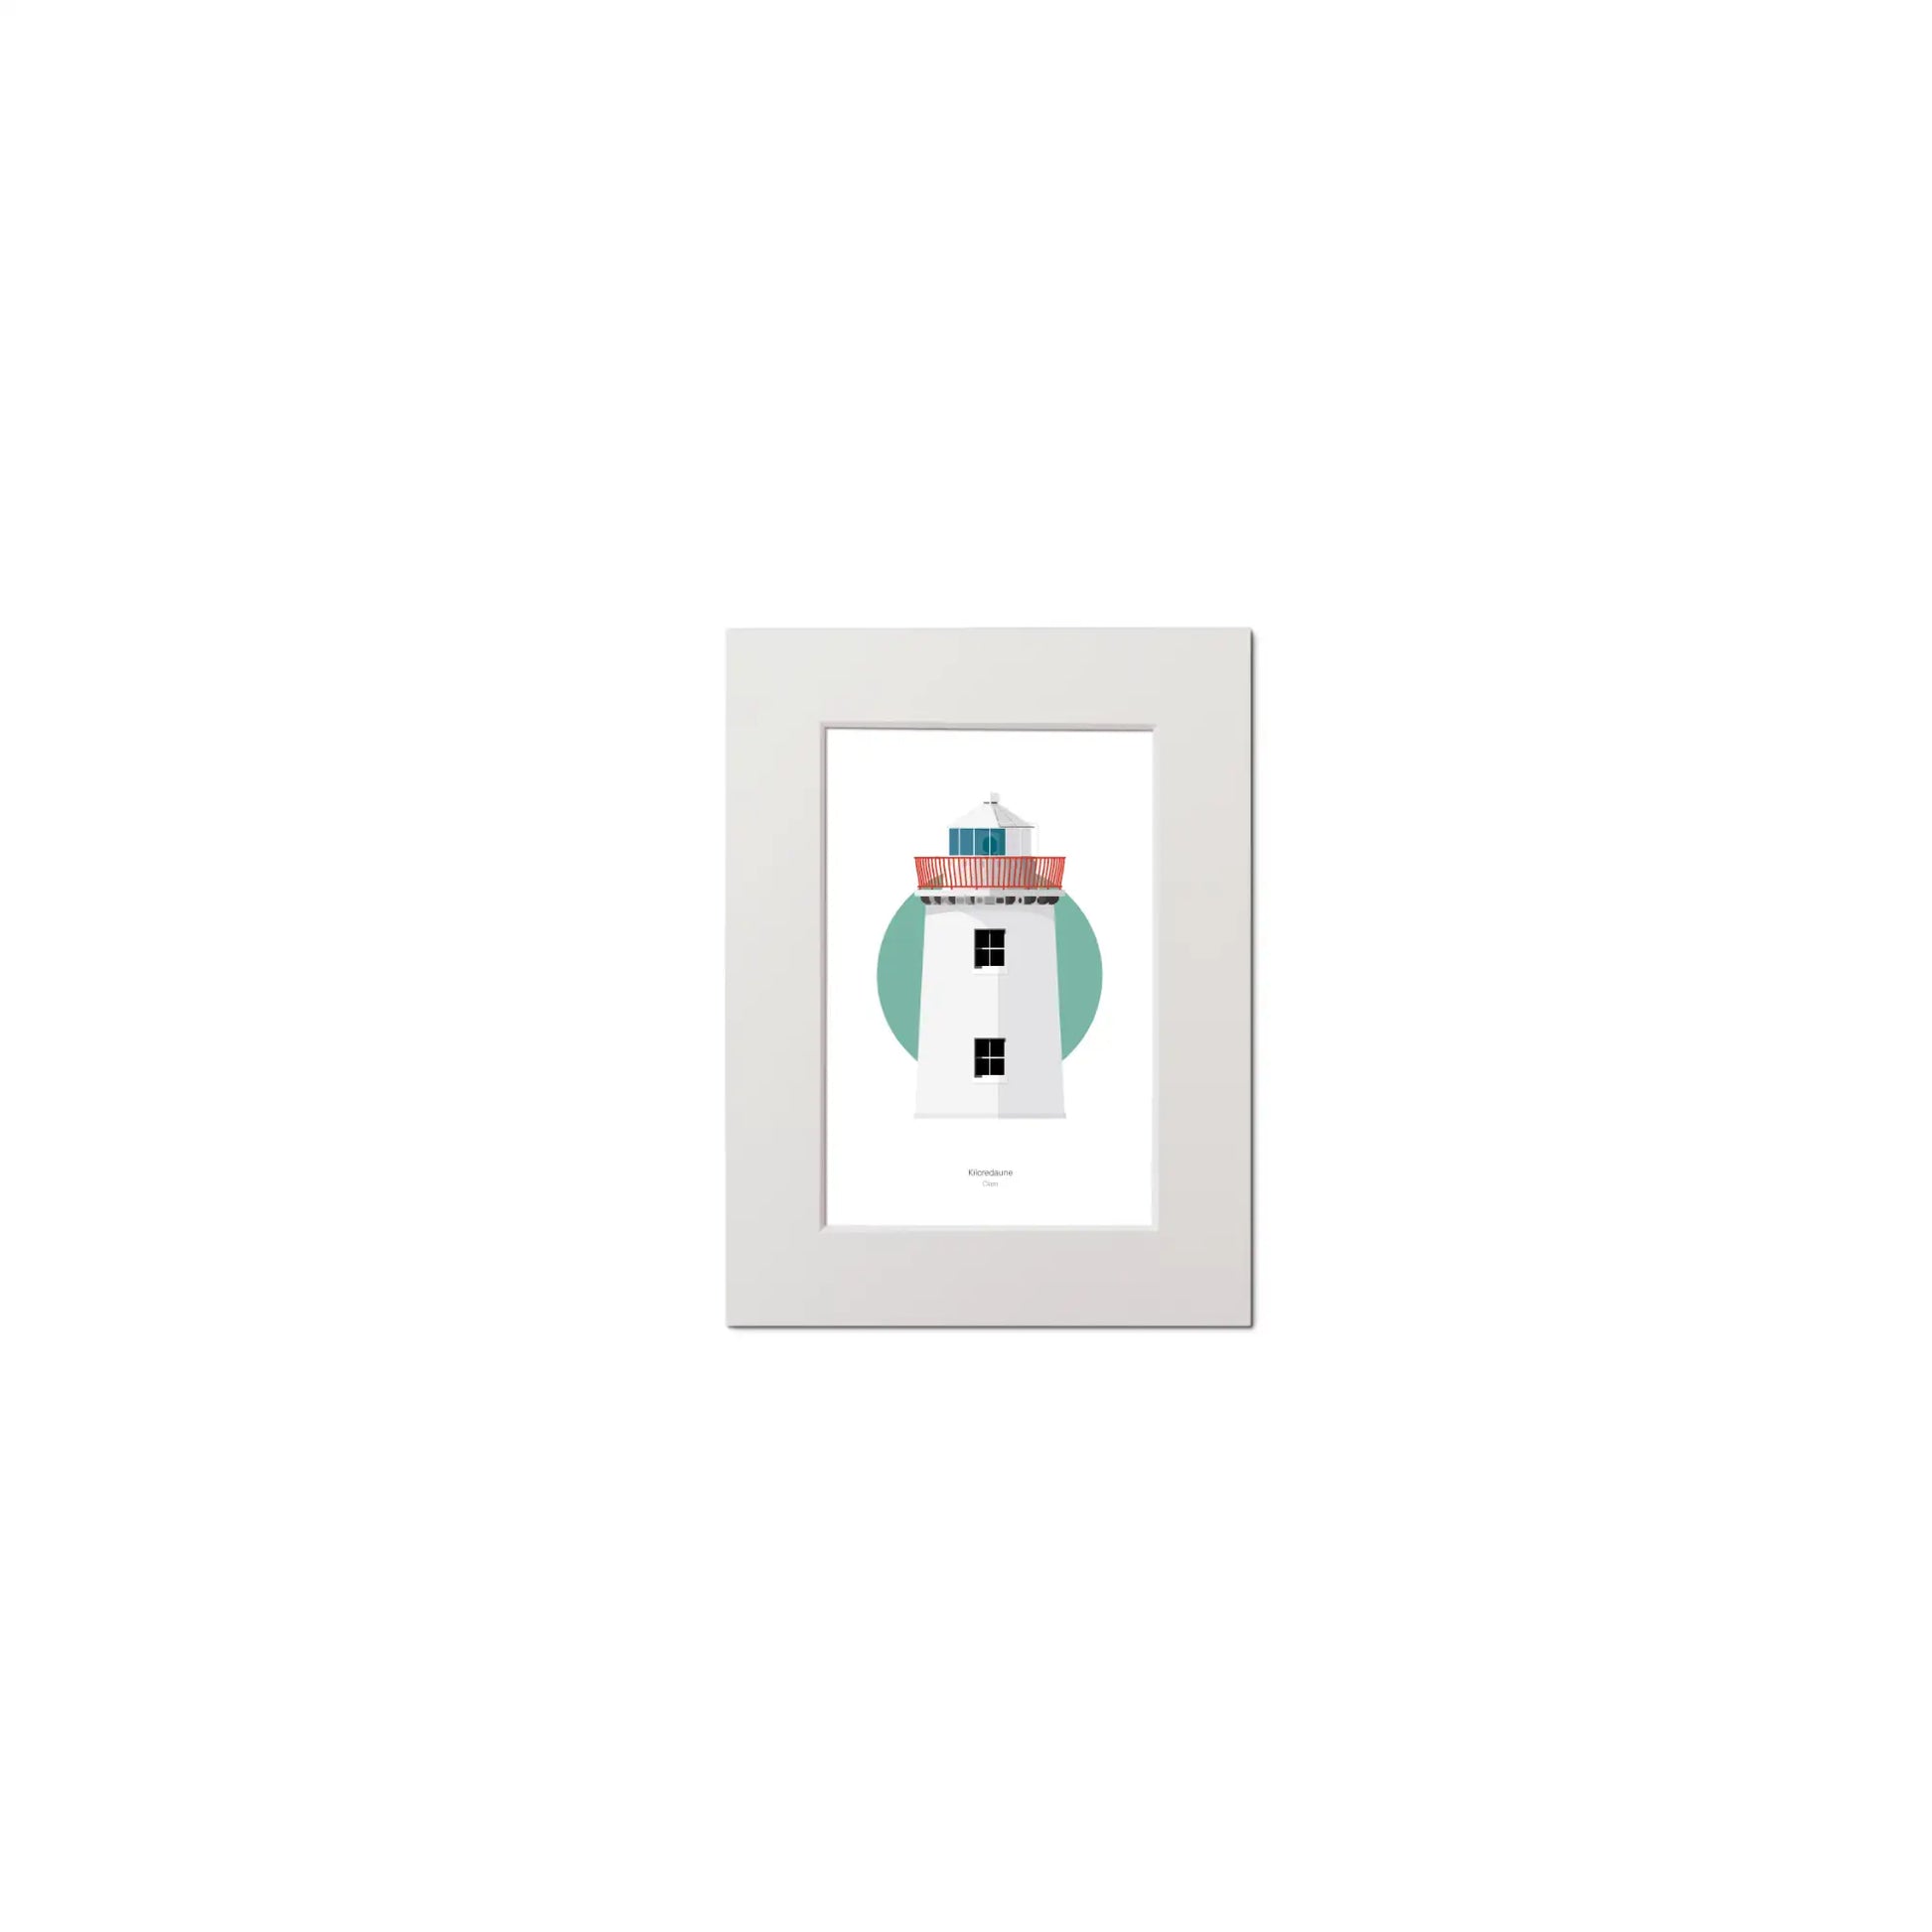 Illustration of Kilcredaun lighthouse on a white background inside light blue square, mounted and measuring 15x20cm.